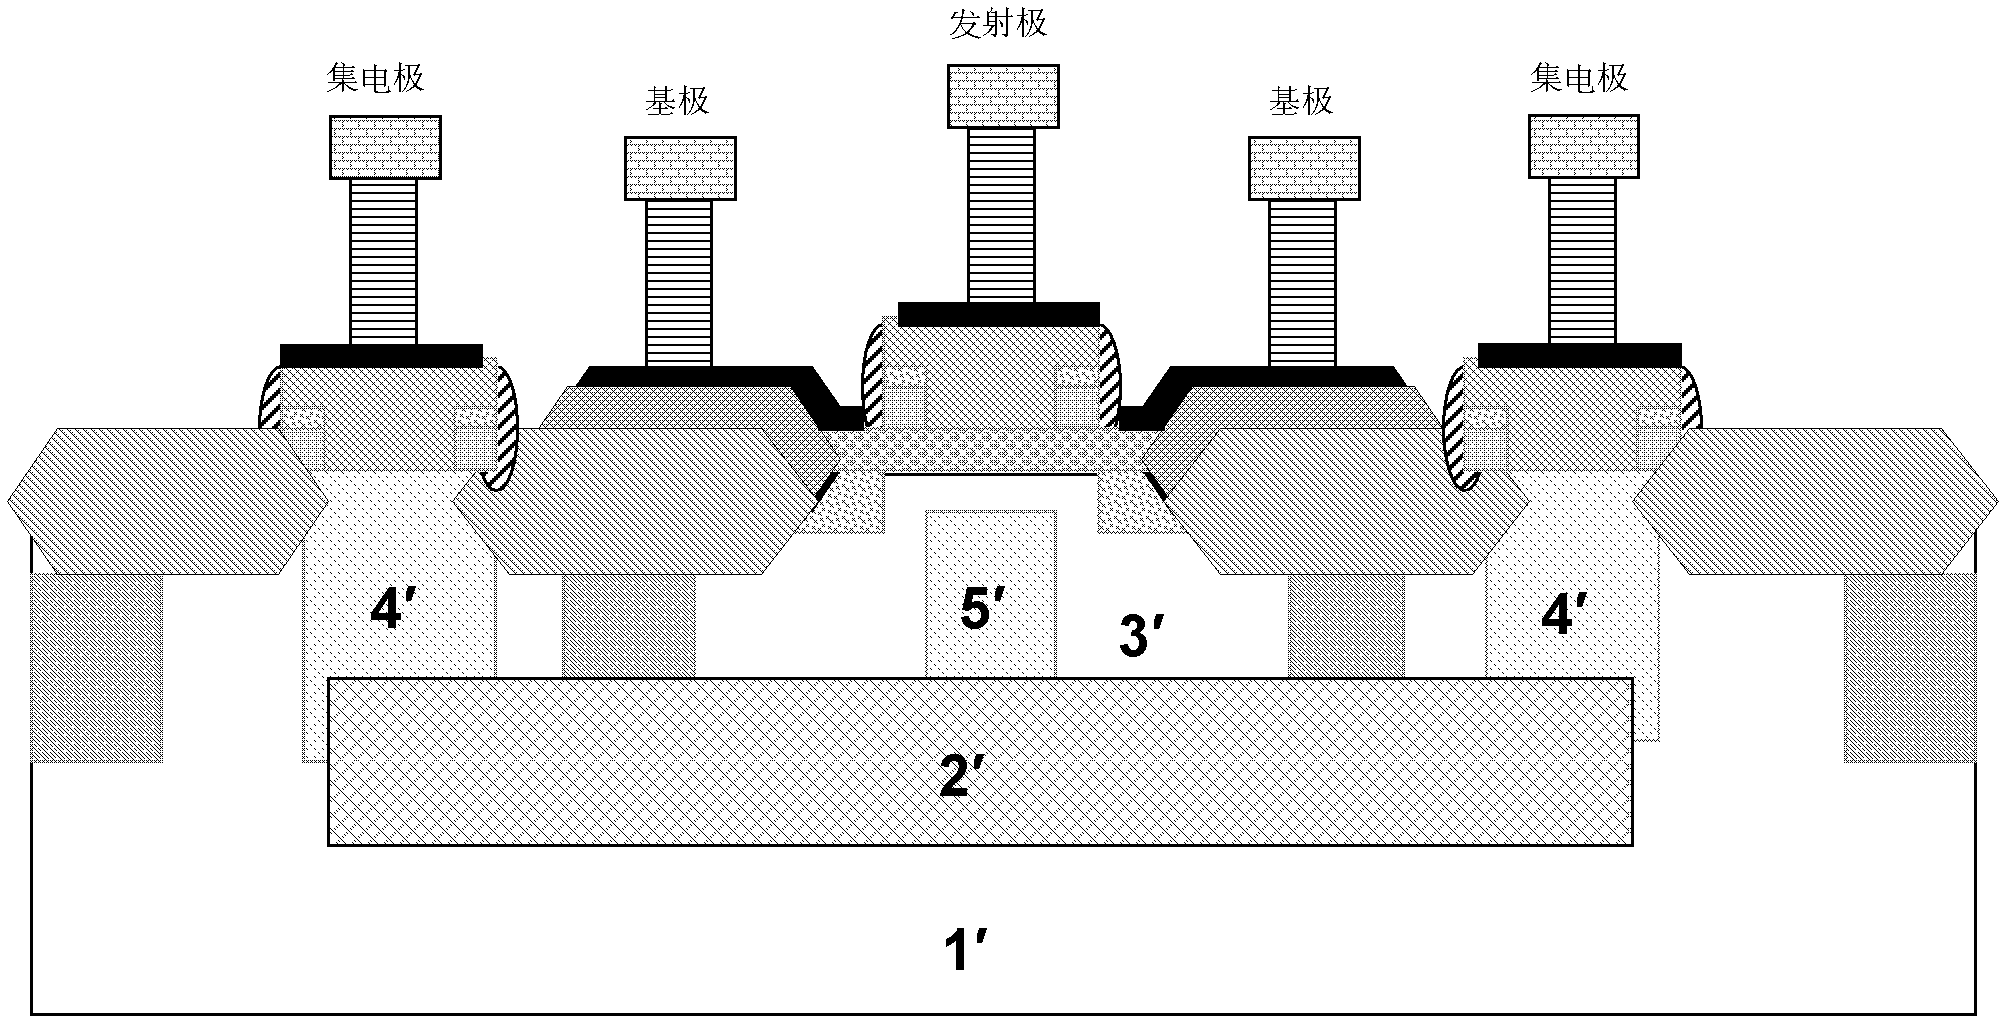 Germanium-silicon heterojunction bipolar transistor (HBT) single tube structure, manufacture method thereof and germanium-silicon HBT multi-finger structure